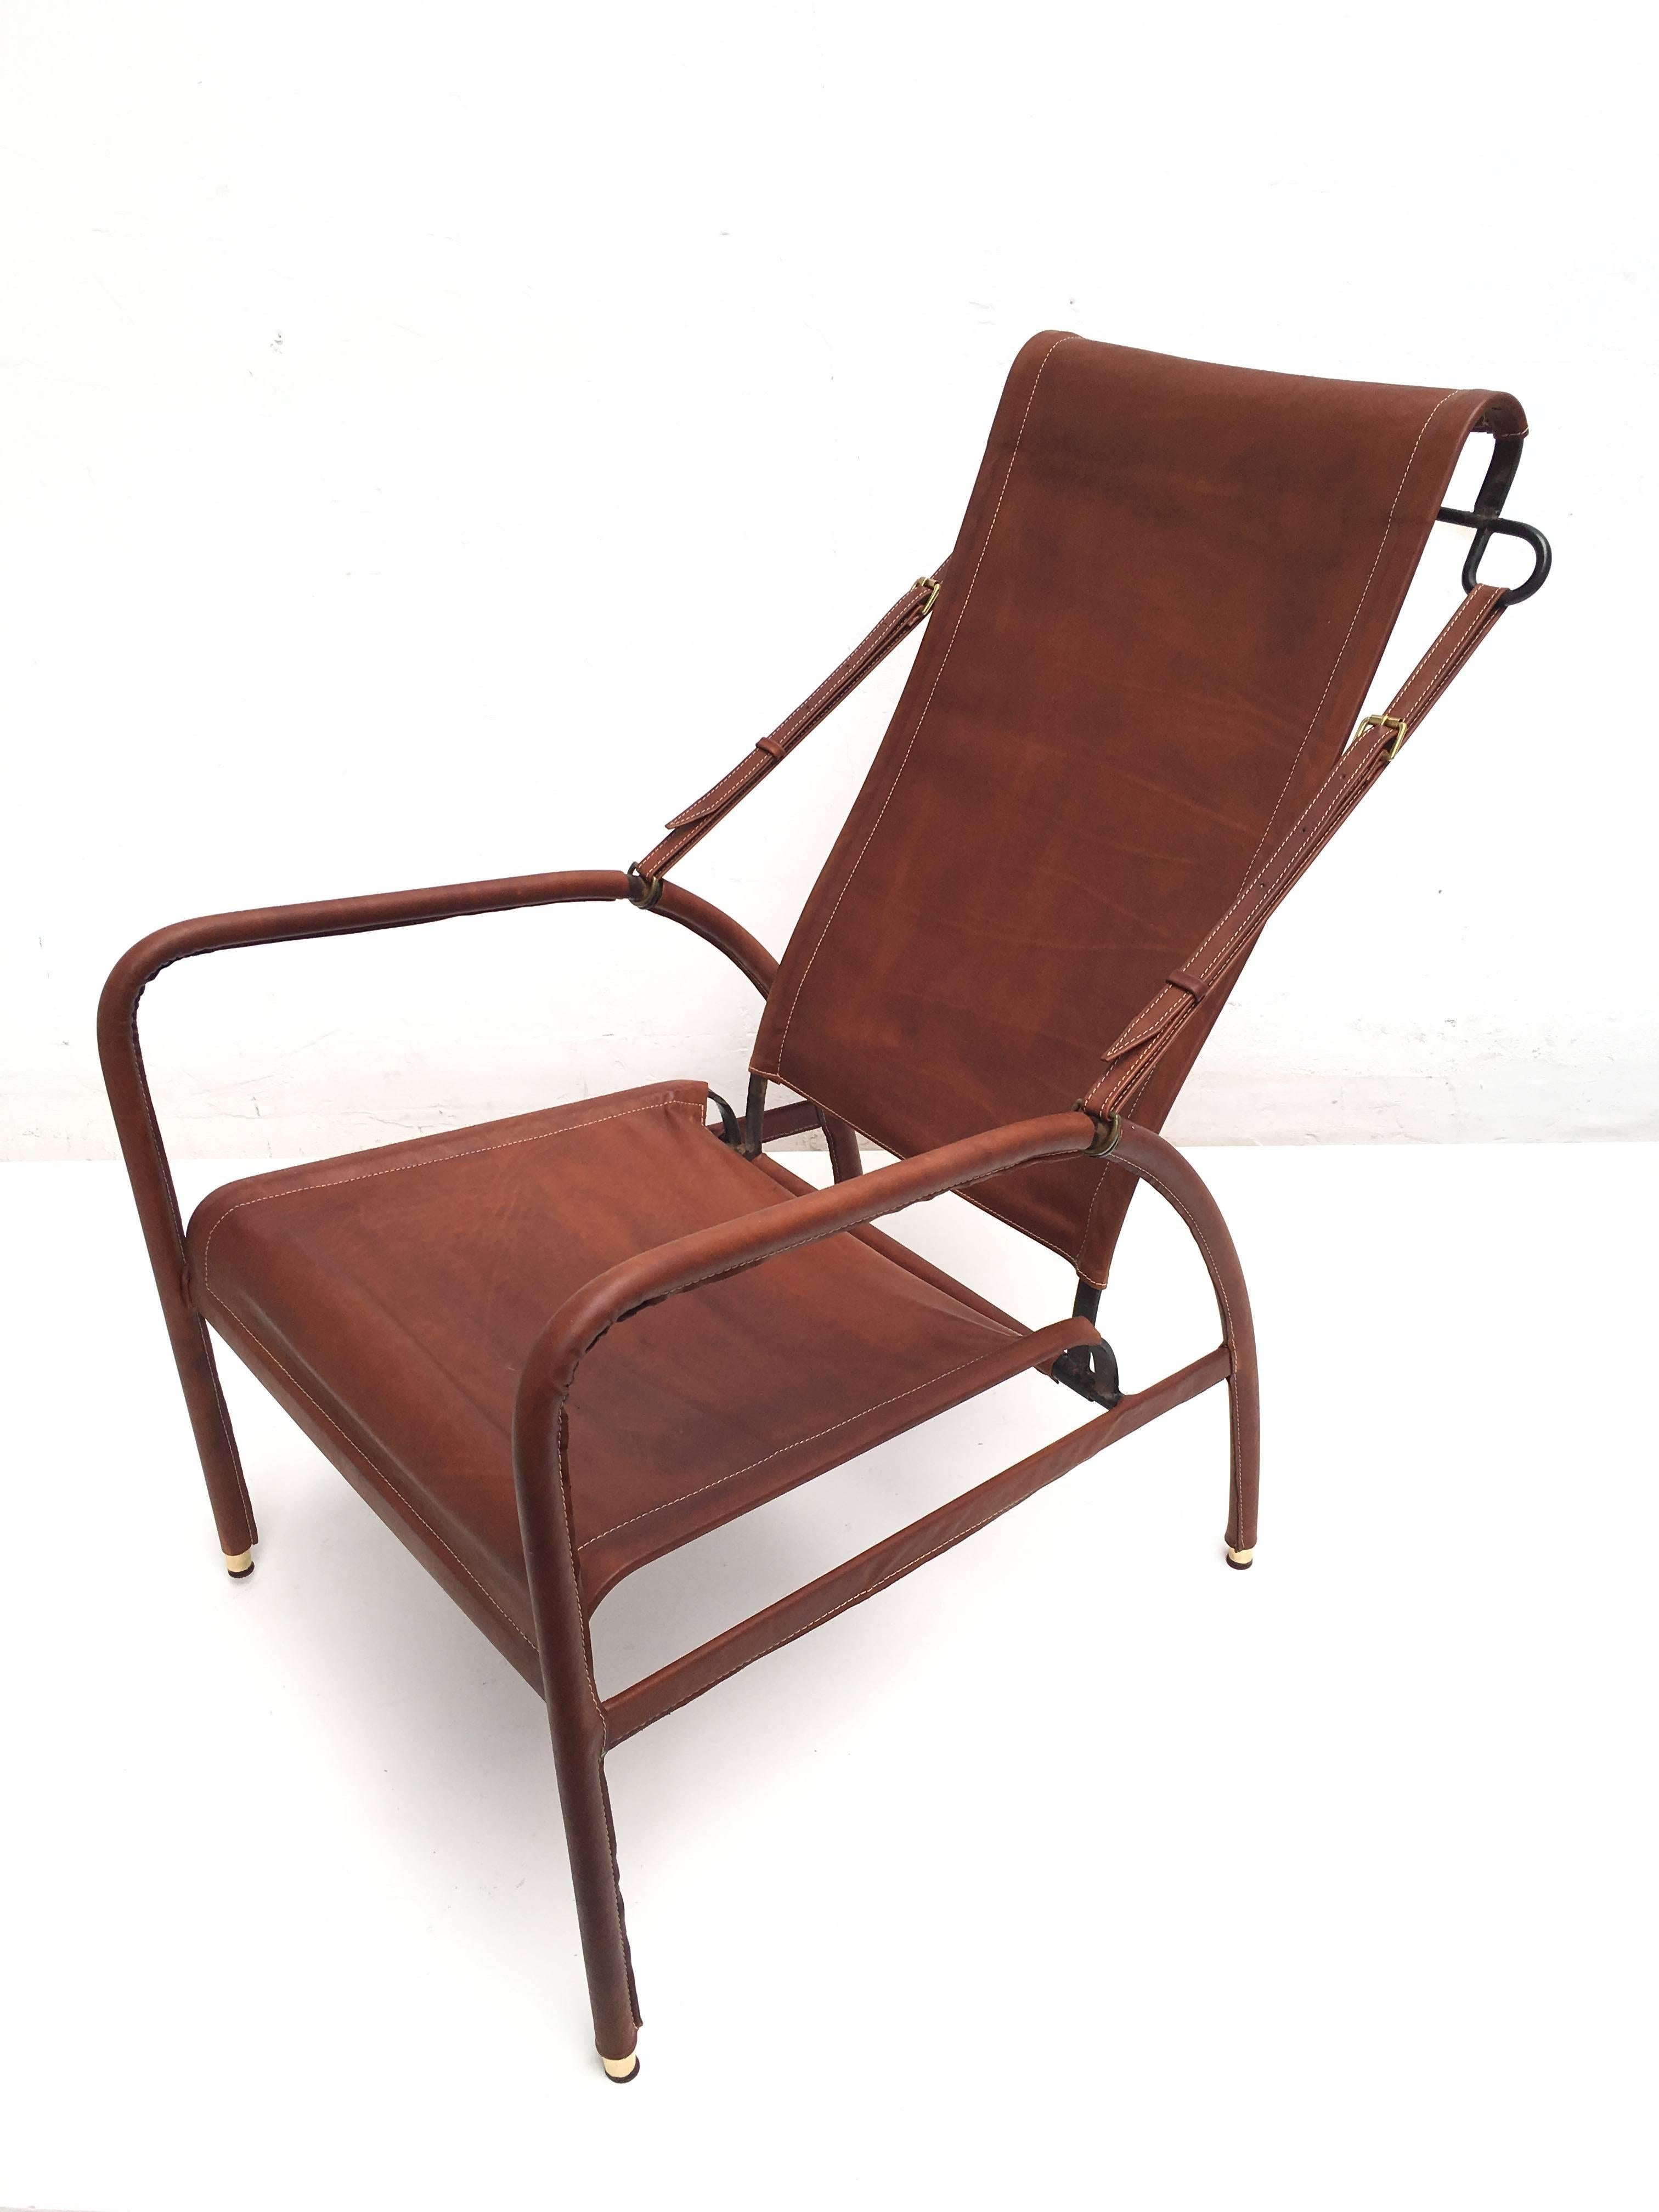 Mid-20th Century Jacques Adnet Lounge Chair Restored with Photos of Restoration Process, 1950